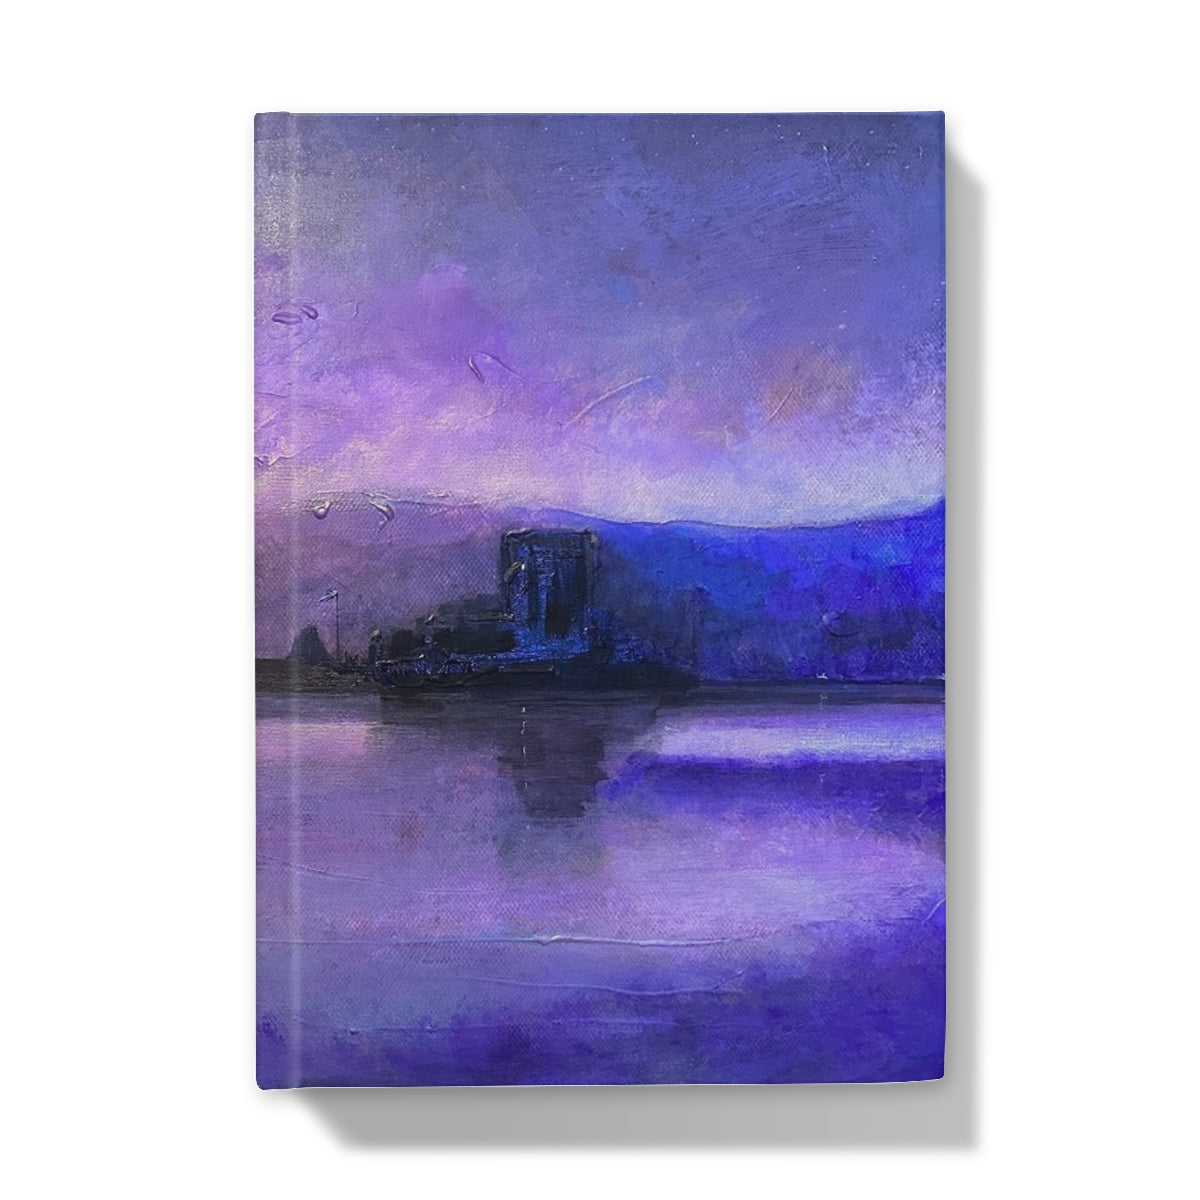 Eilean Donan Castle Moonset Art Gifts Hardback Journal-Journals & Notebooks-Historic & Iconic Scotland Art Gallery-A4-Plain-Paintings, Prints, Homeware, Art Gifts From Scotland By Scottish Artist Kevin Hunter